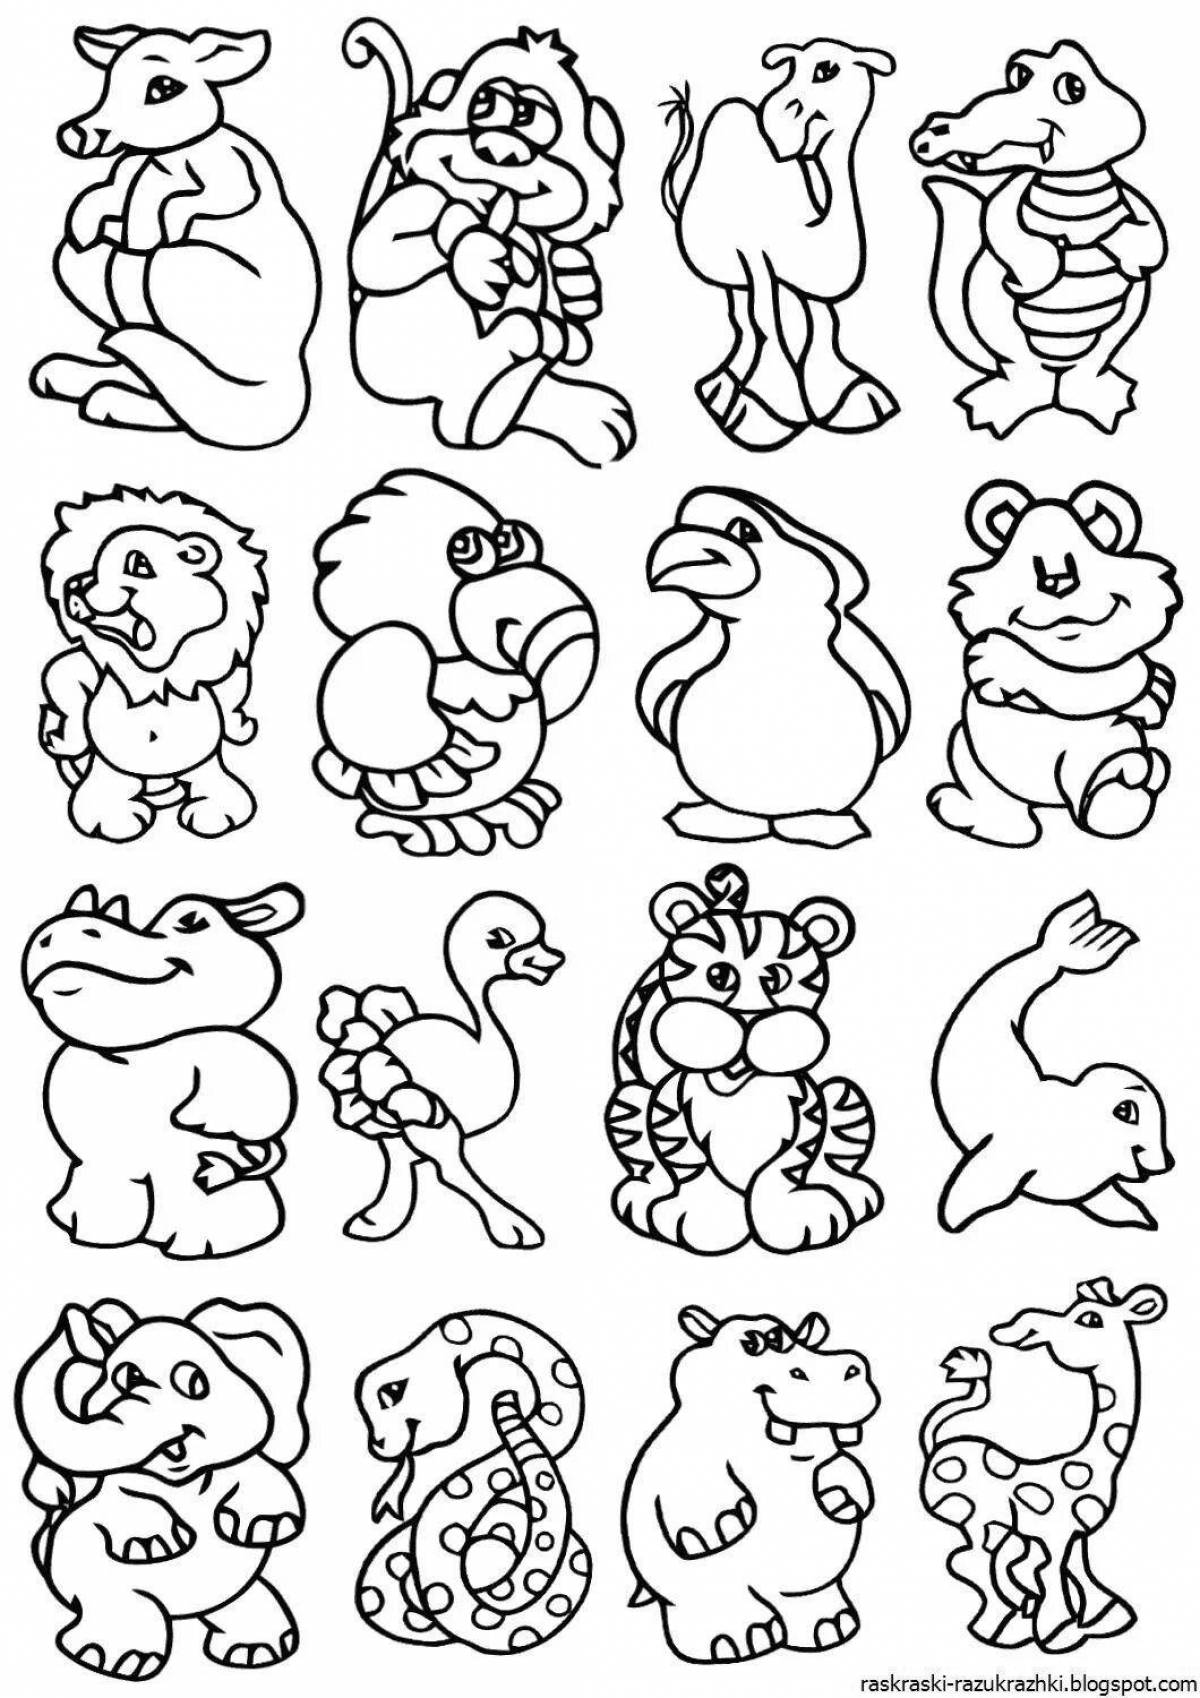 Delightful coloring many on one sheet, small